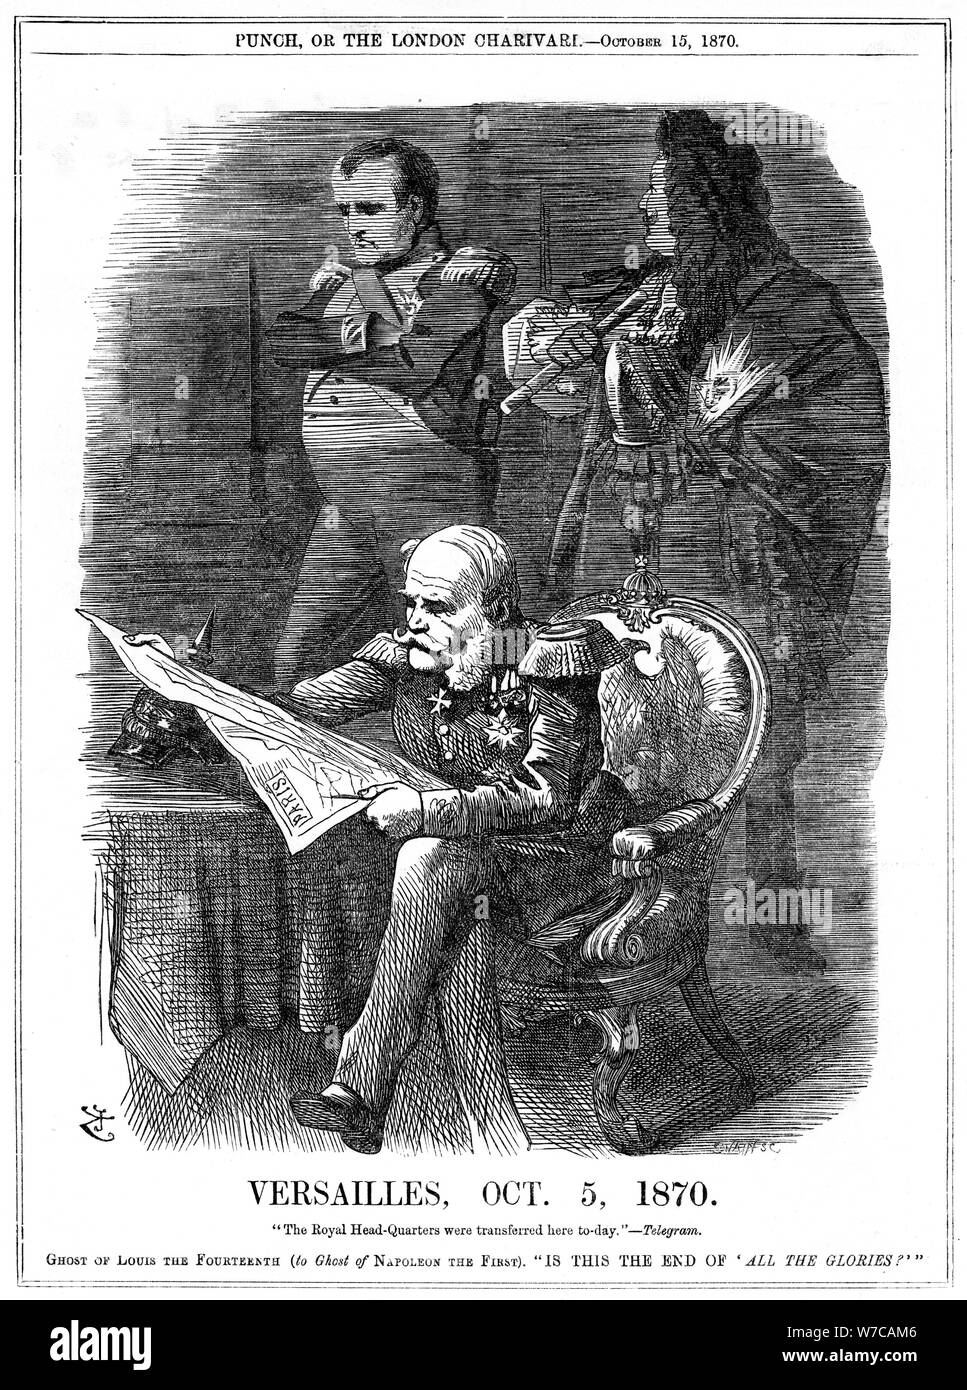 Shades of Louis XIV and Napoleon I lamenting the fading of France's glory, 1870. Artist: John Tenniel Stock Photo